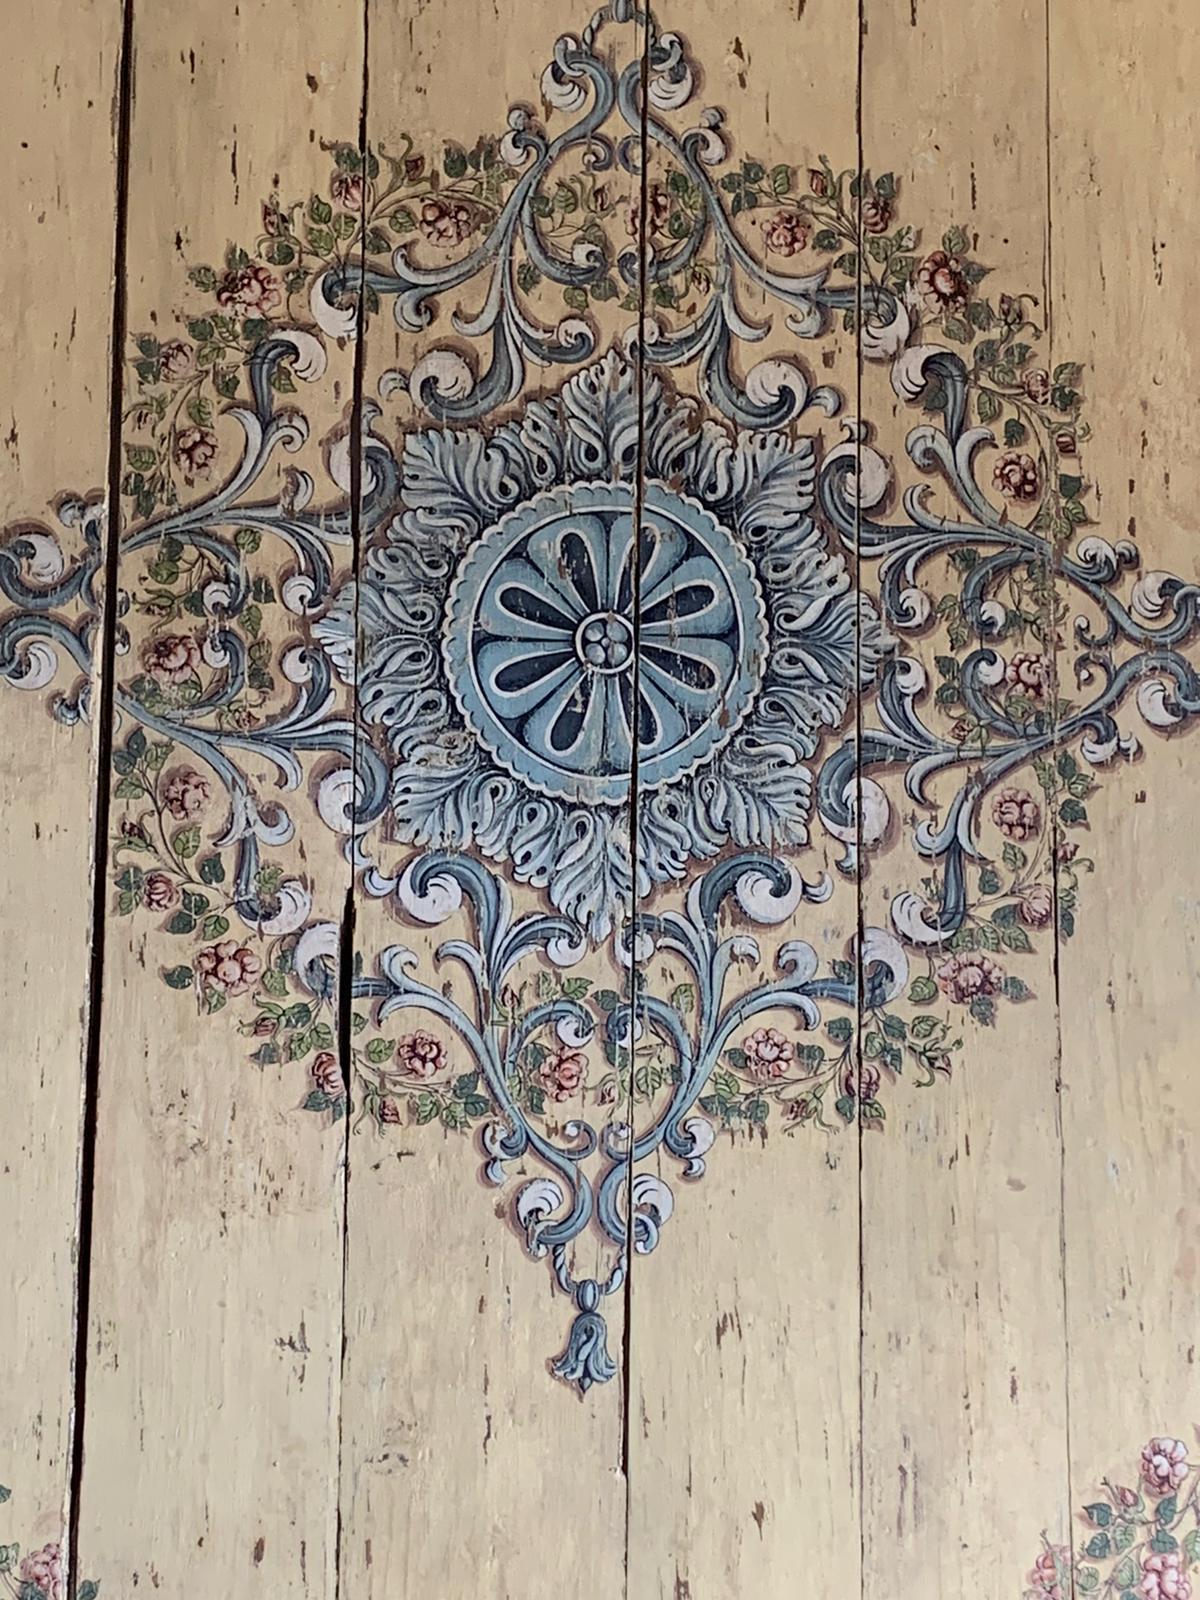 Antique ceiling painted on wooden boards, lacquered and painted with a Baroque design with classic and floral motifs, painted and composed at the beginning of the 18th century for the prestigious ballroom of a villa in Italy, from Central Italy,